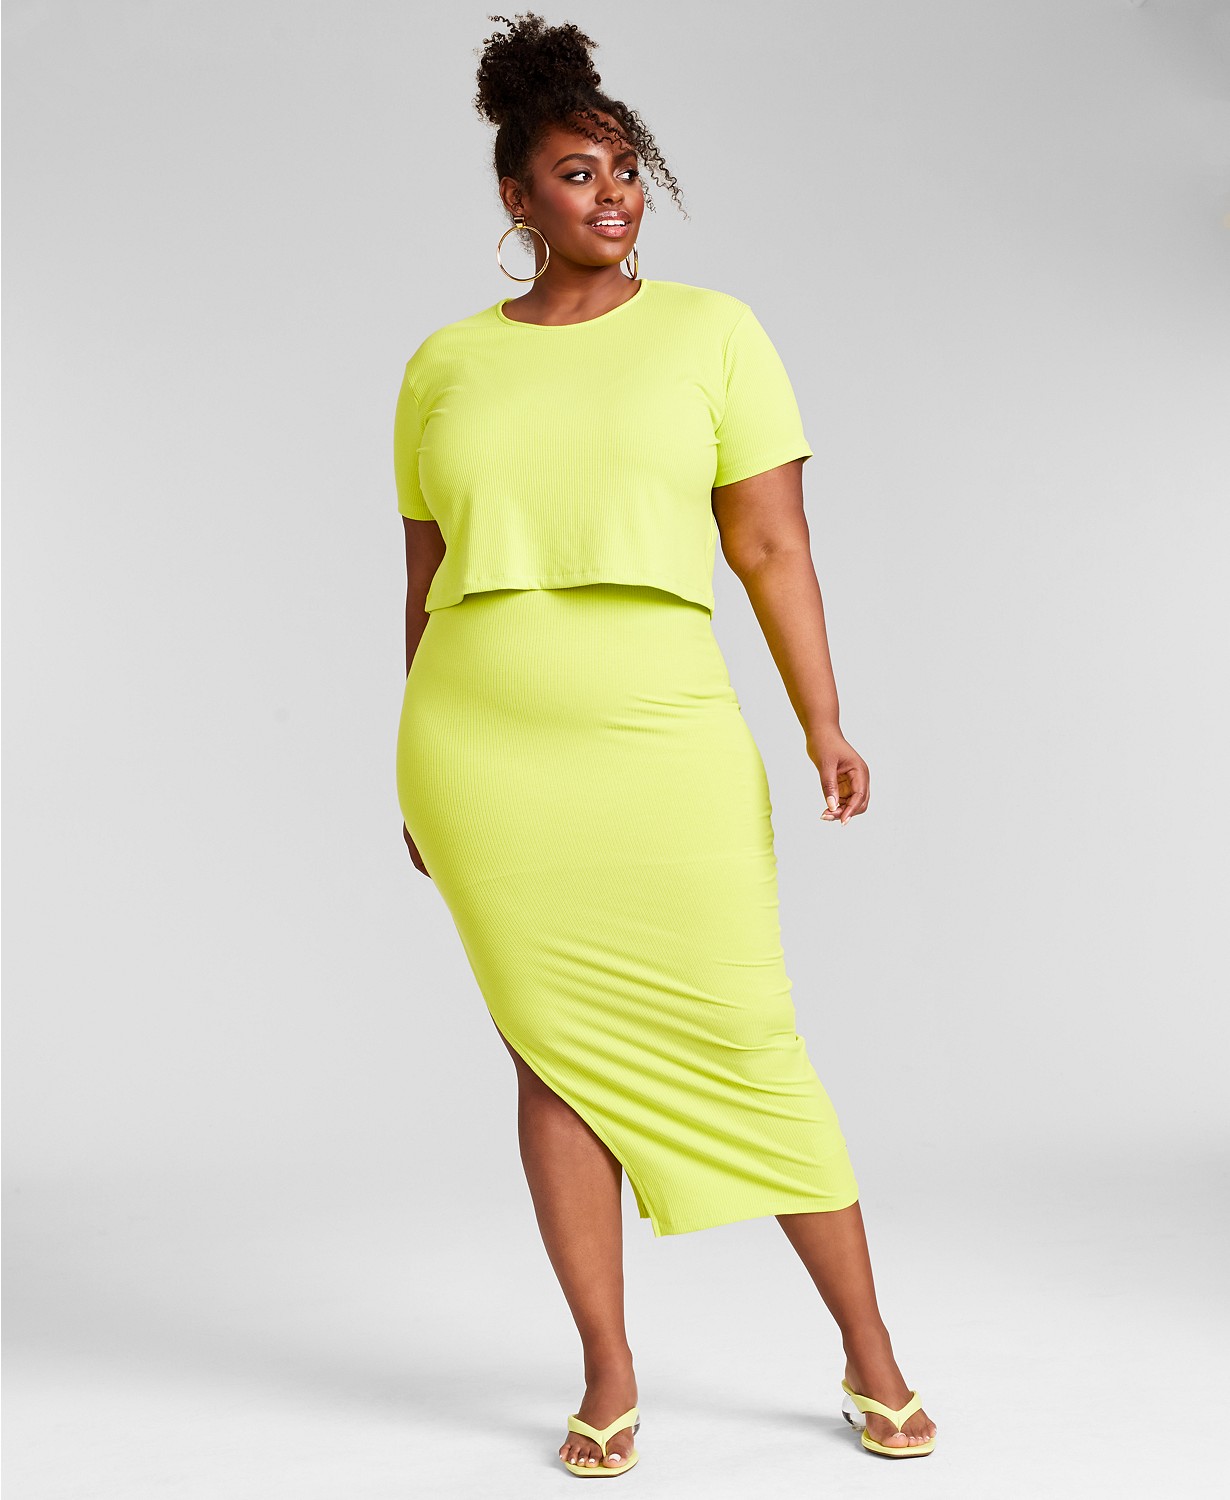 E!'s Nina Parker Launches New Plus-Size Line with Macy's